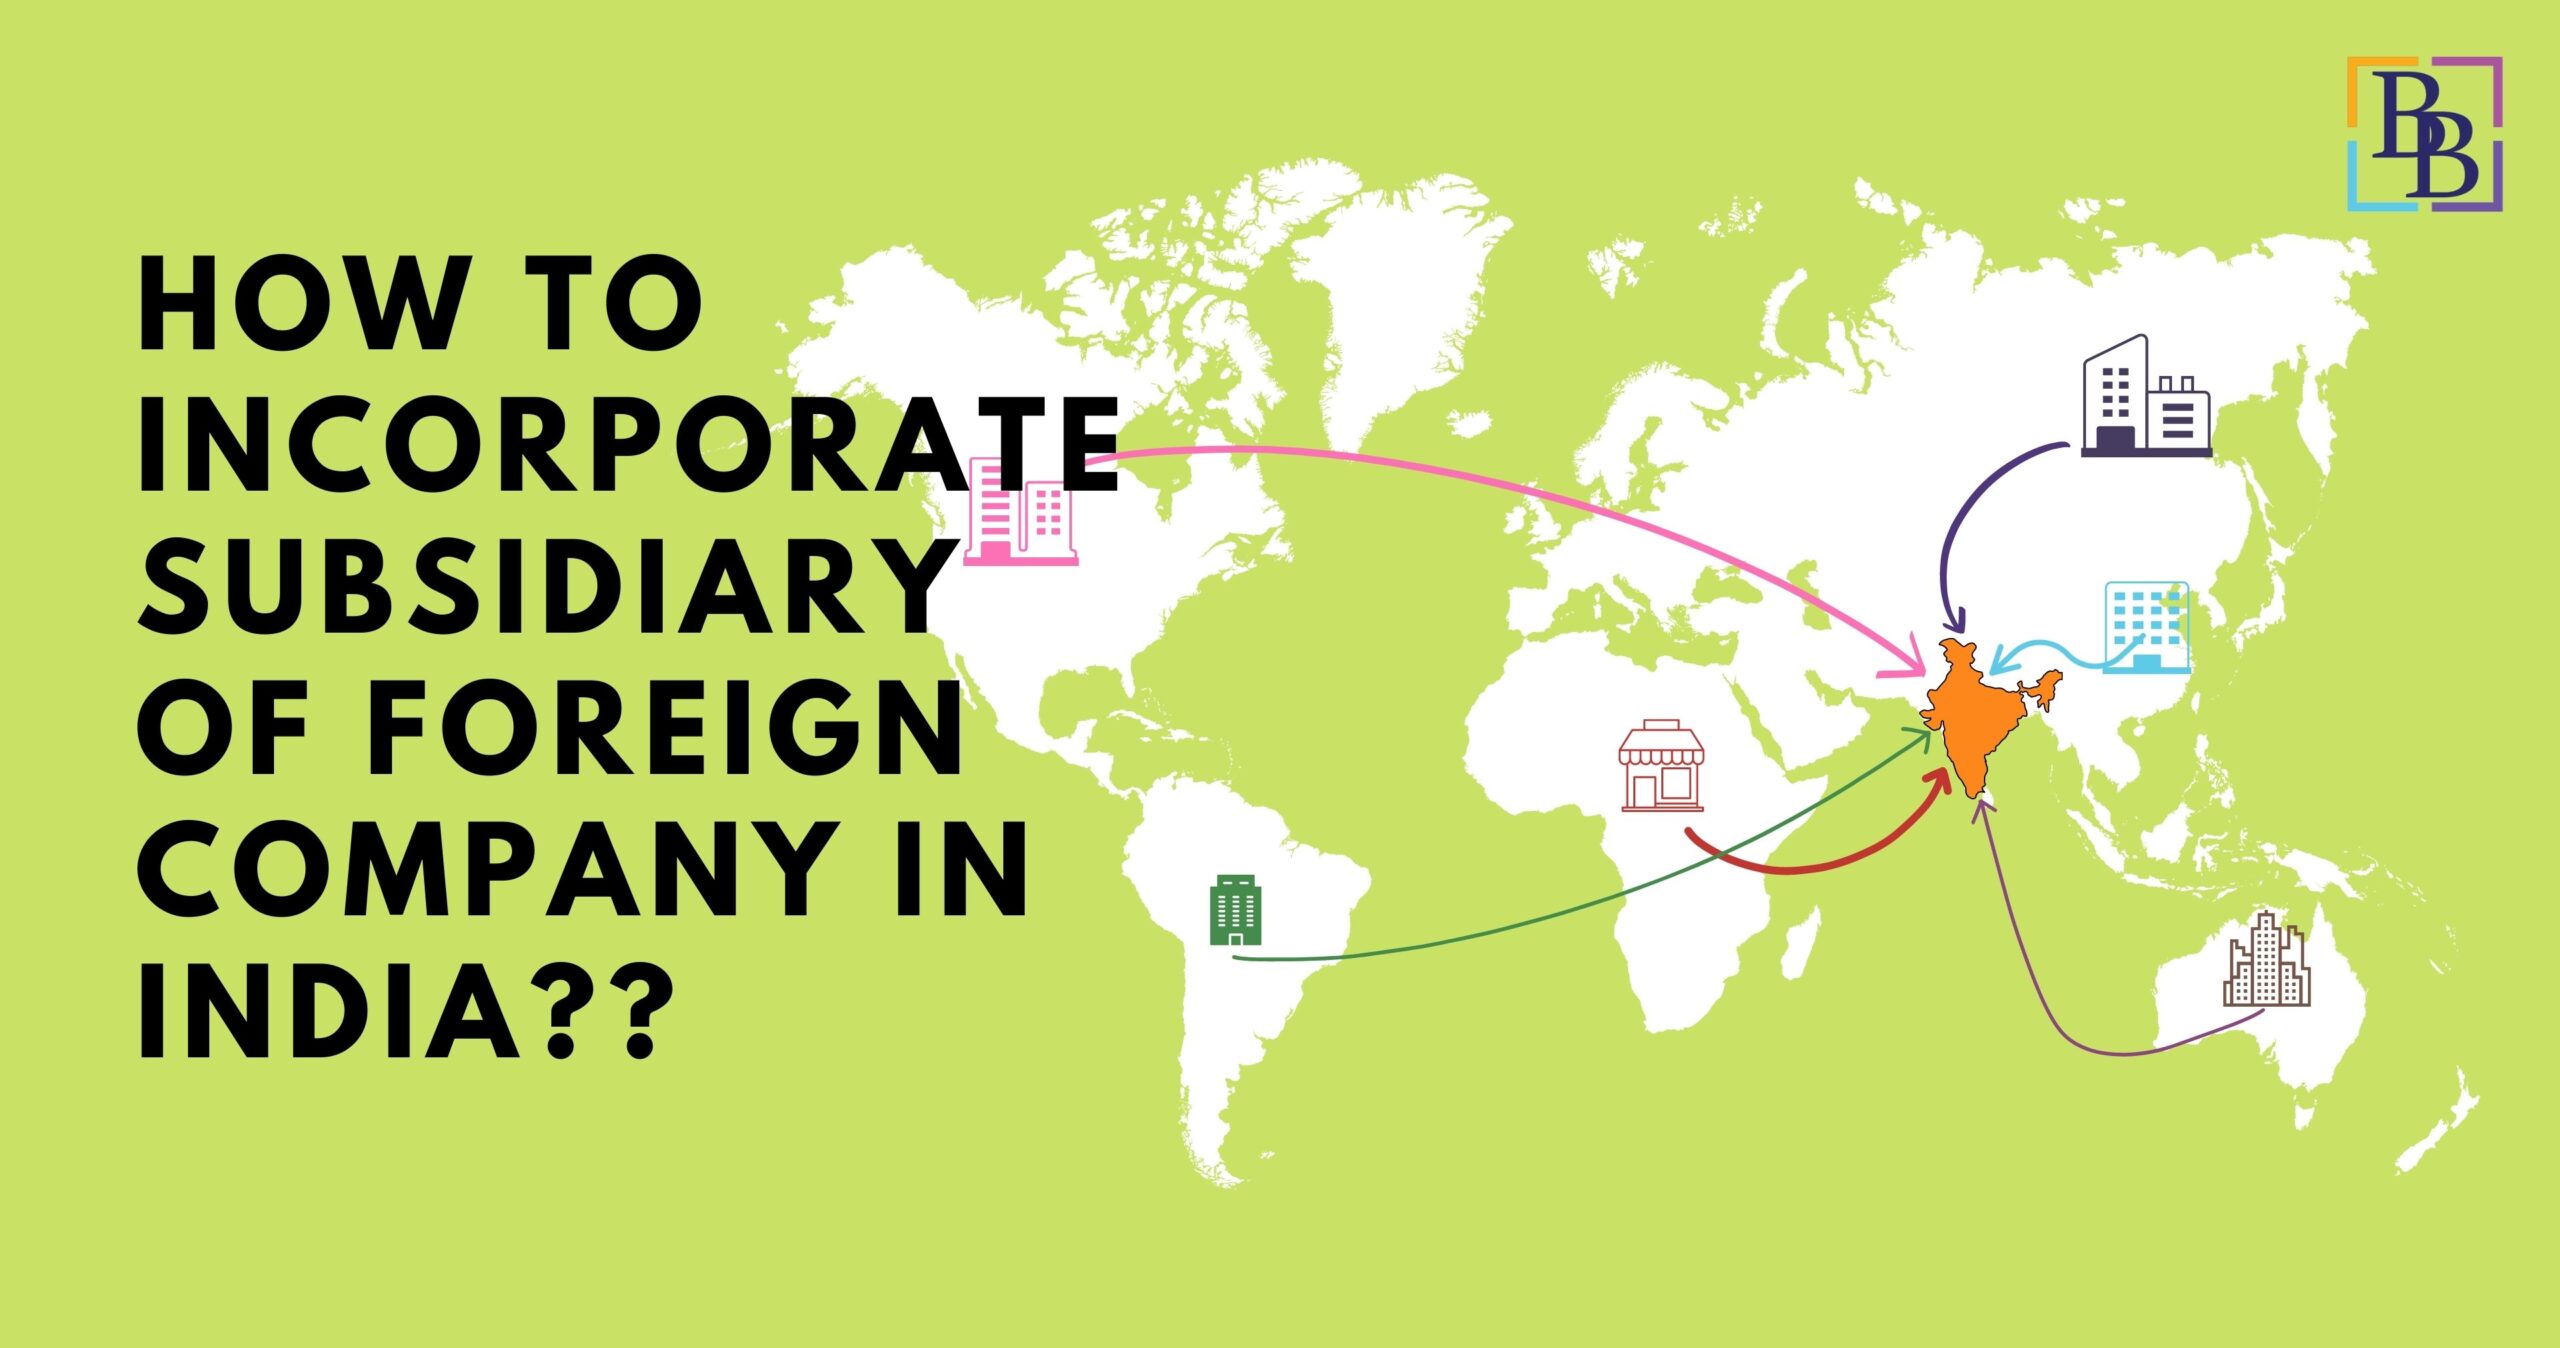 How to Incorporate a subsidiary of foreign company in India